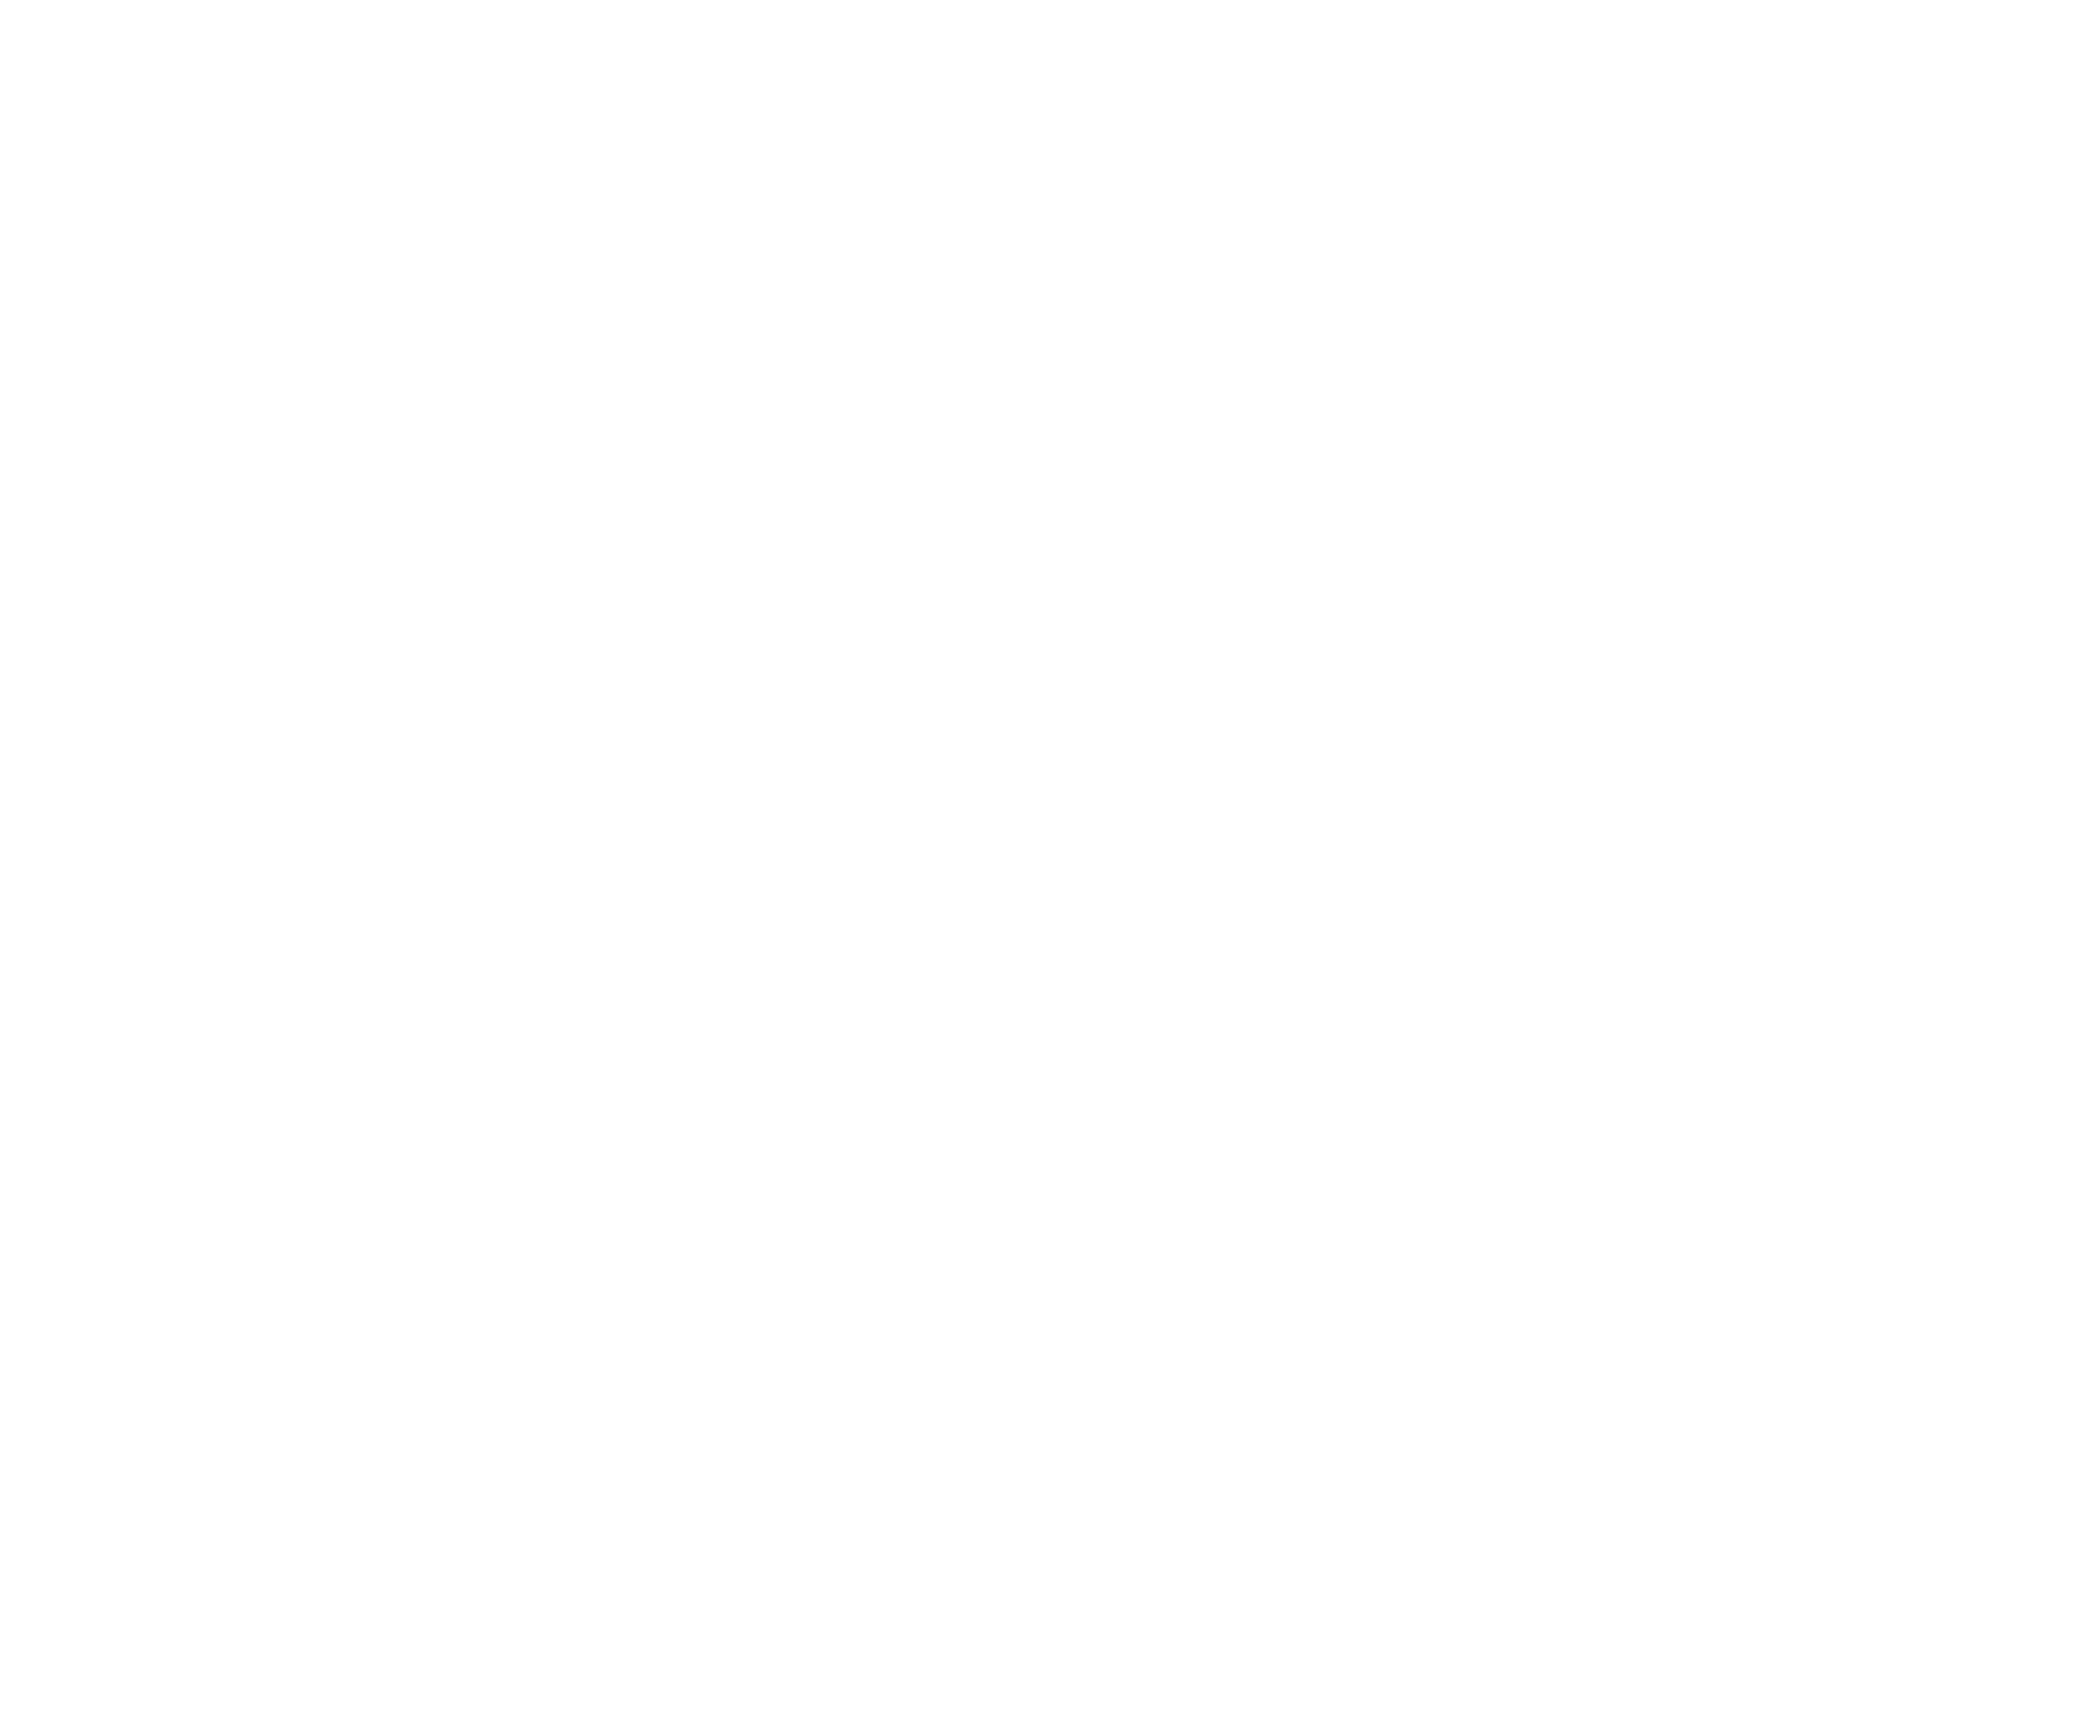 Contact And Market Hours Covent Garden Market